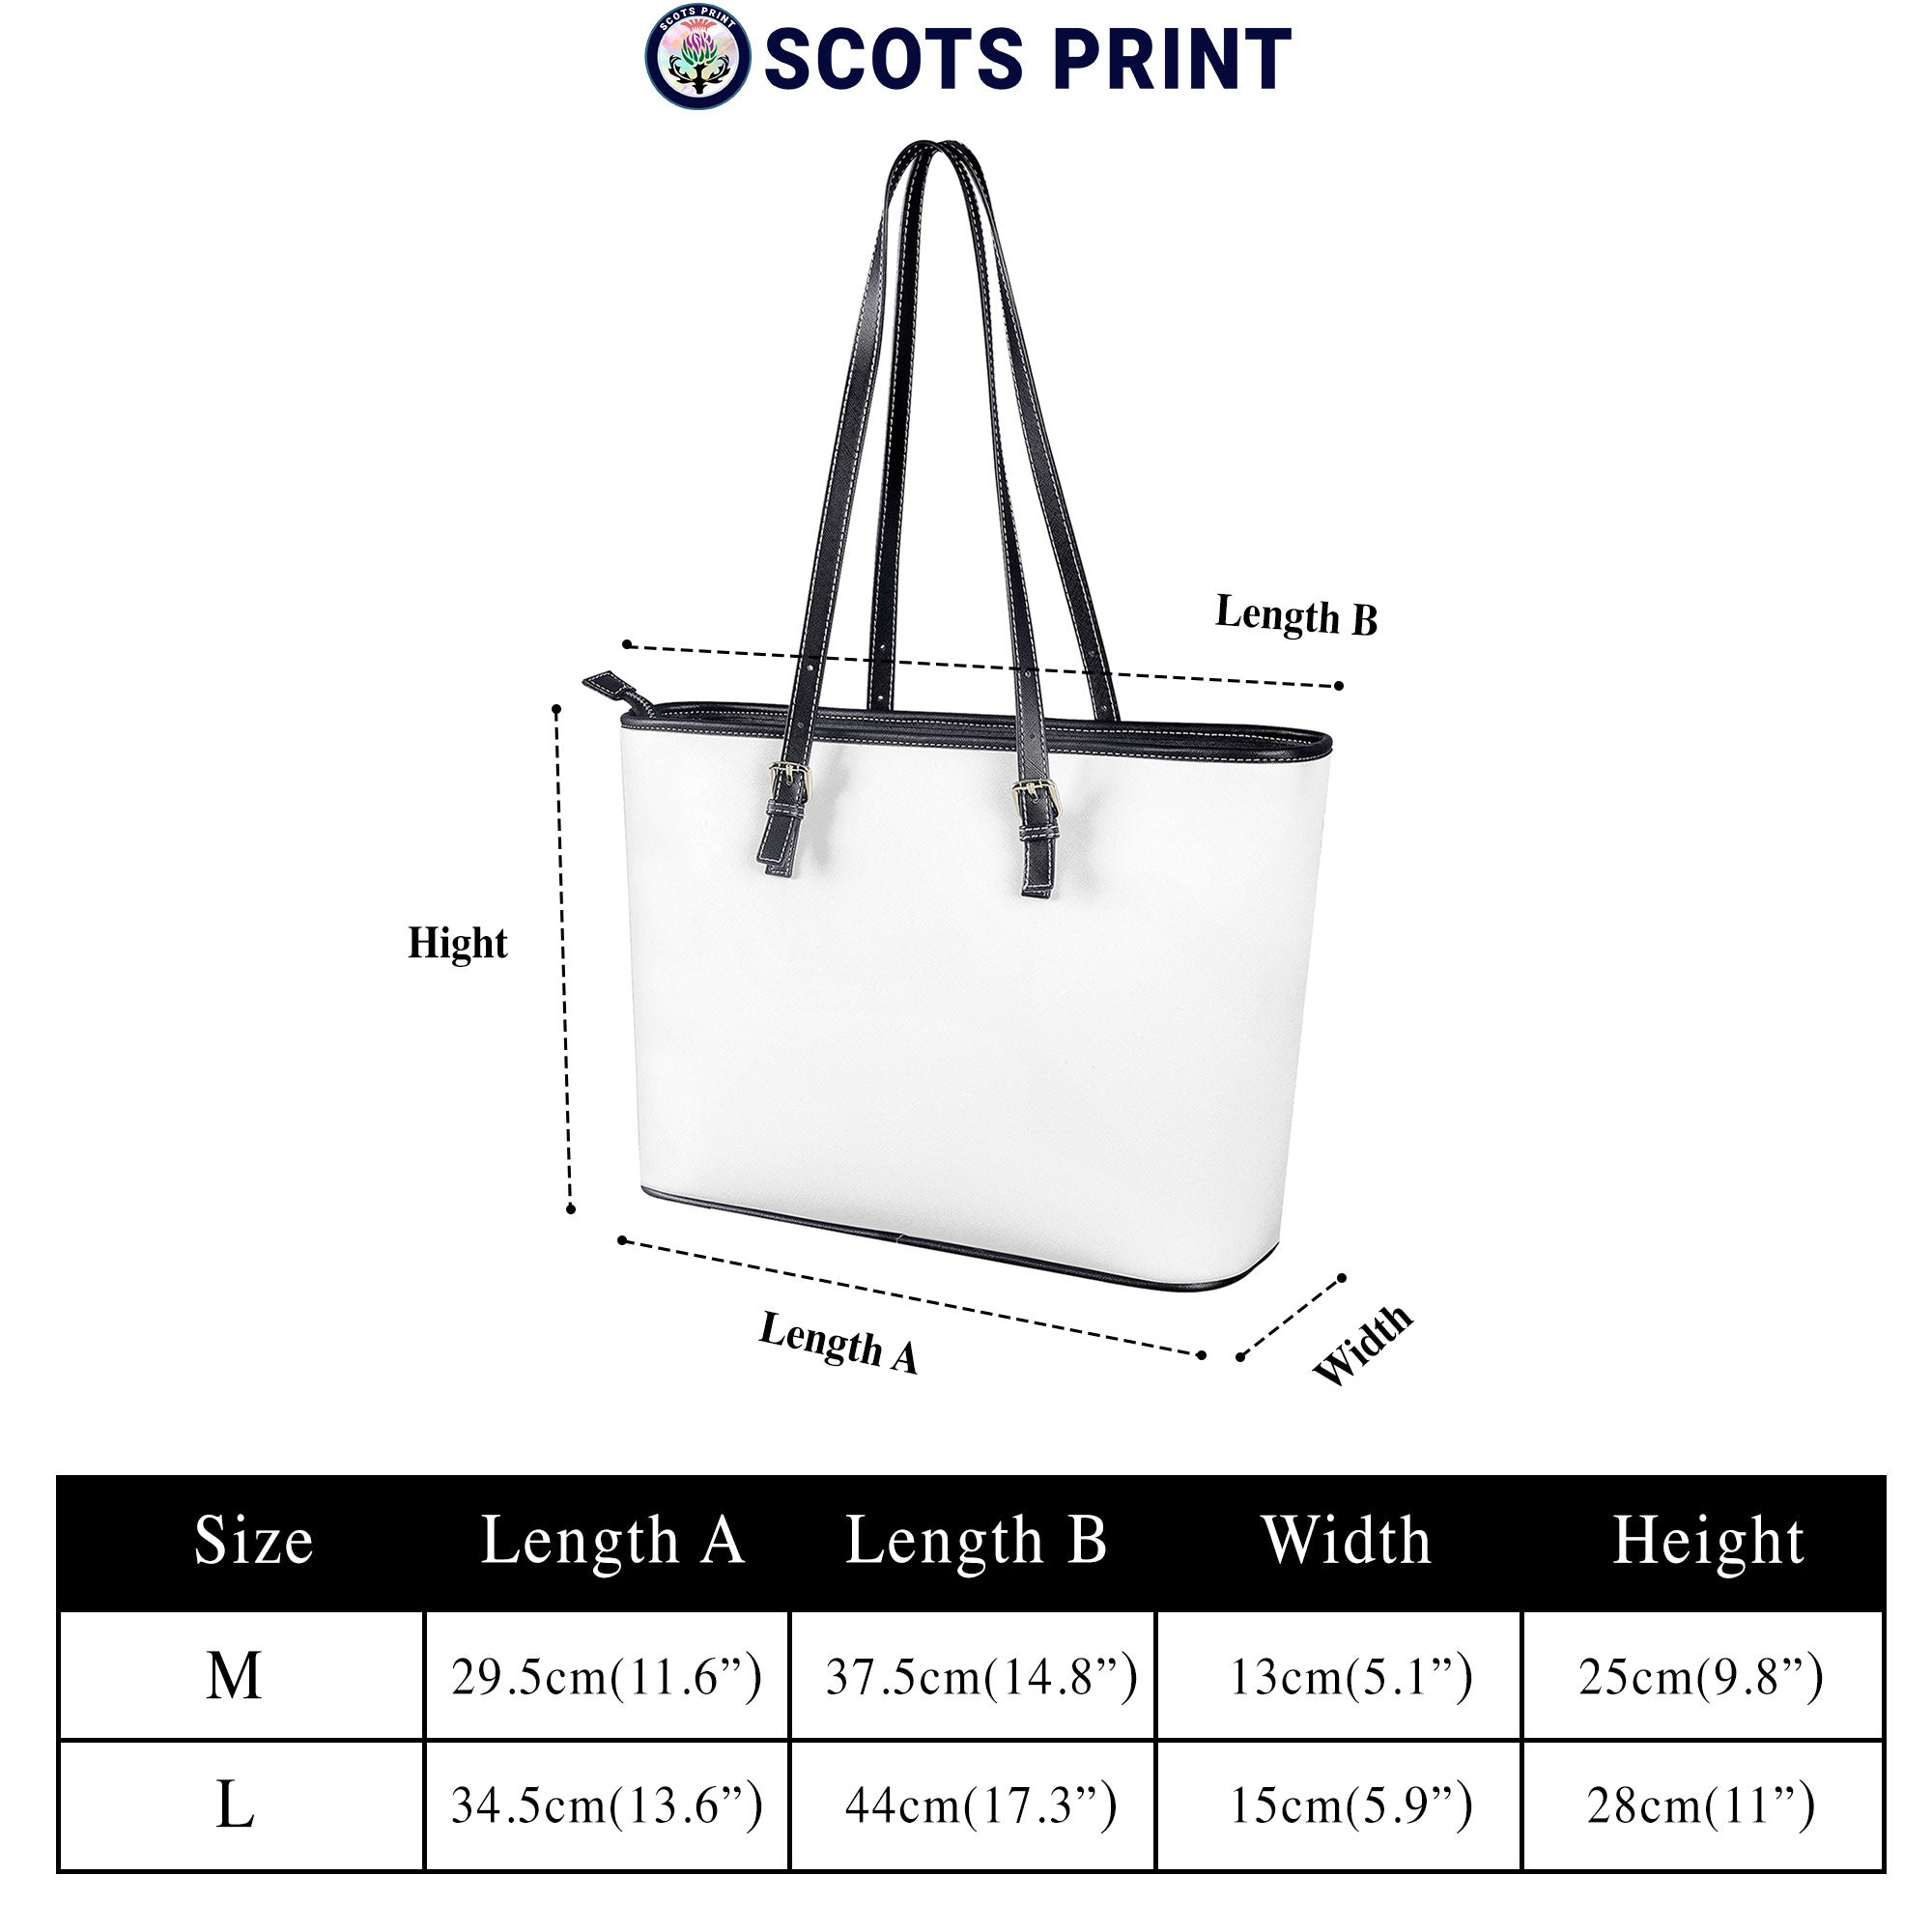 Maxwell Hunting Tartan Crest Leather Tote Bag